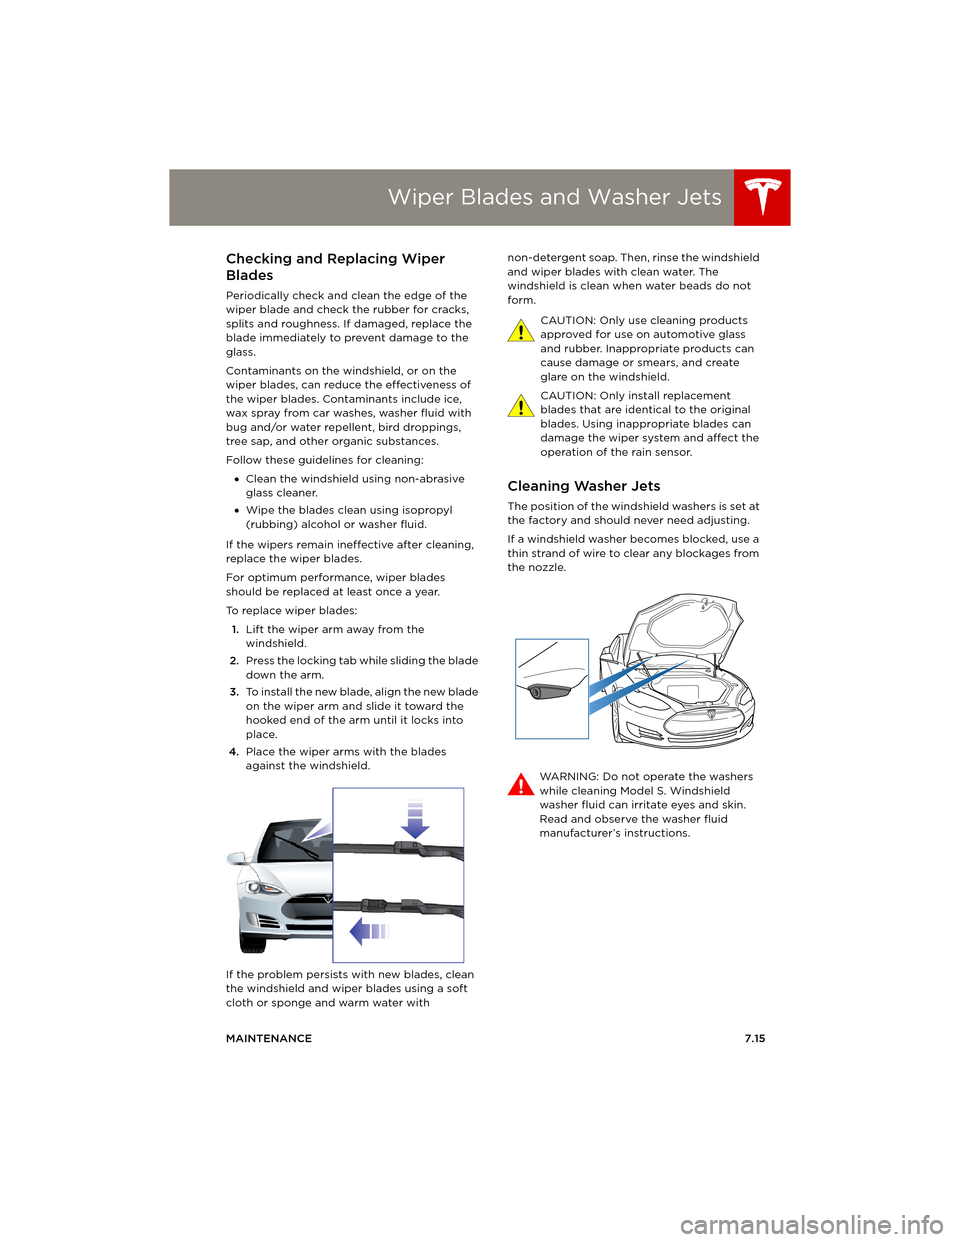 TESLA MODEL S 2014  Owners manual (Europe) Wiper Blades and Washer Jets
MAINTENANCE7.15
Wiper Blades and Washer JetsChecking and Replacing Wiper 
Blades
Periodically check and clean the edge of the 
wiper blade and check the rubber for cracks,